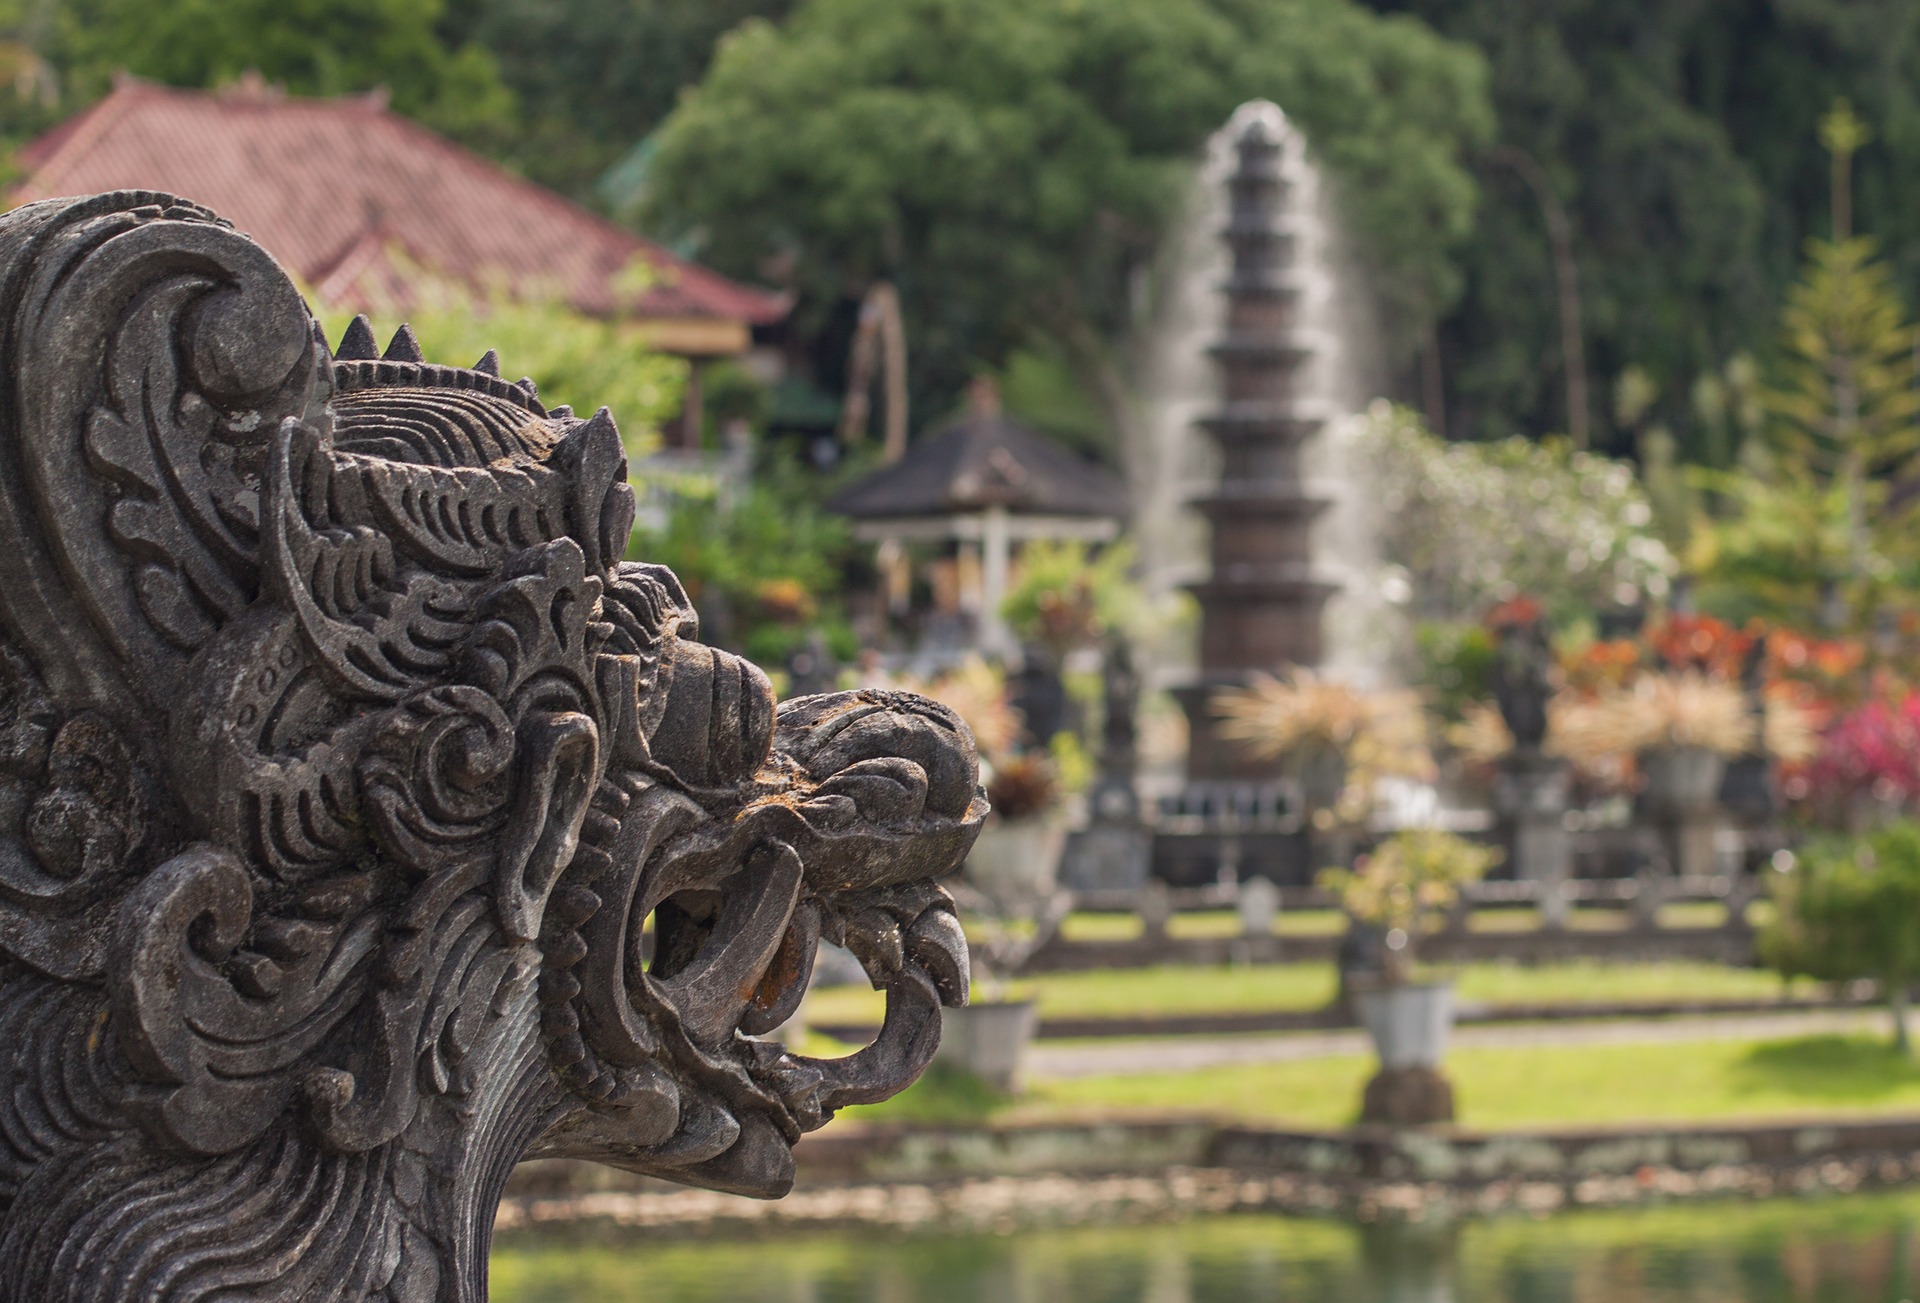 bali indonesia - Travel Contests: February 16th, 2022 - Bali, Spain, Italy, & more